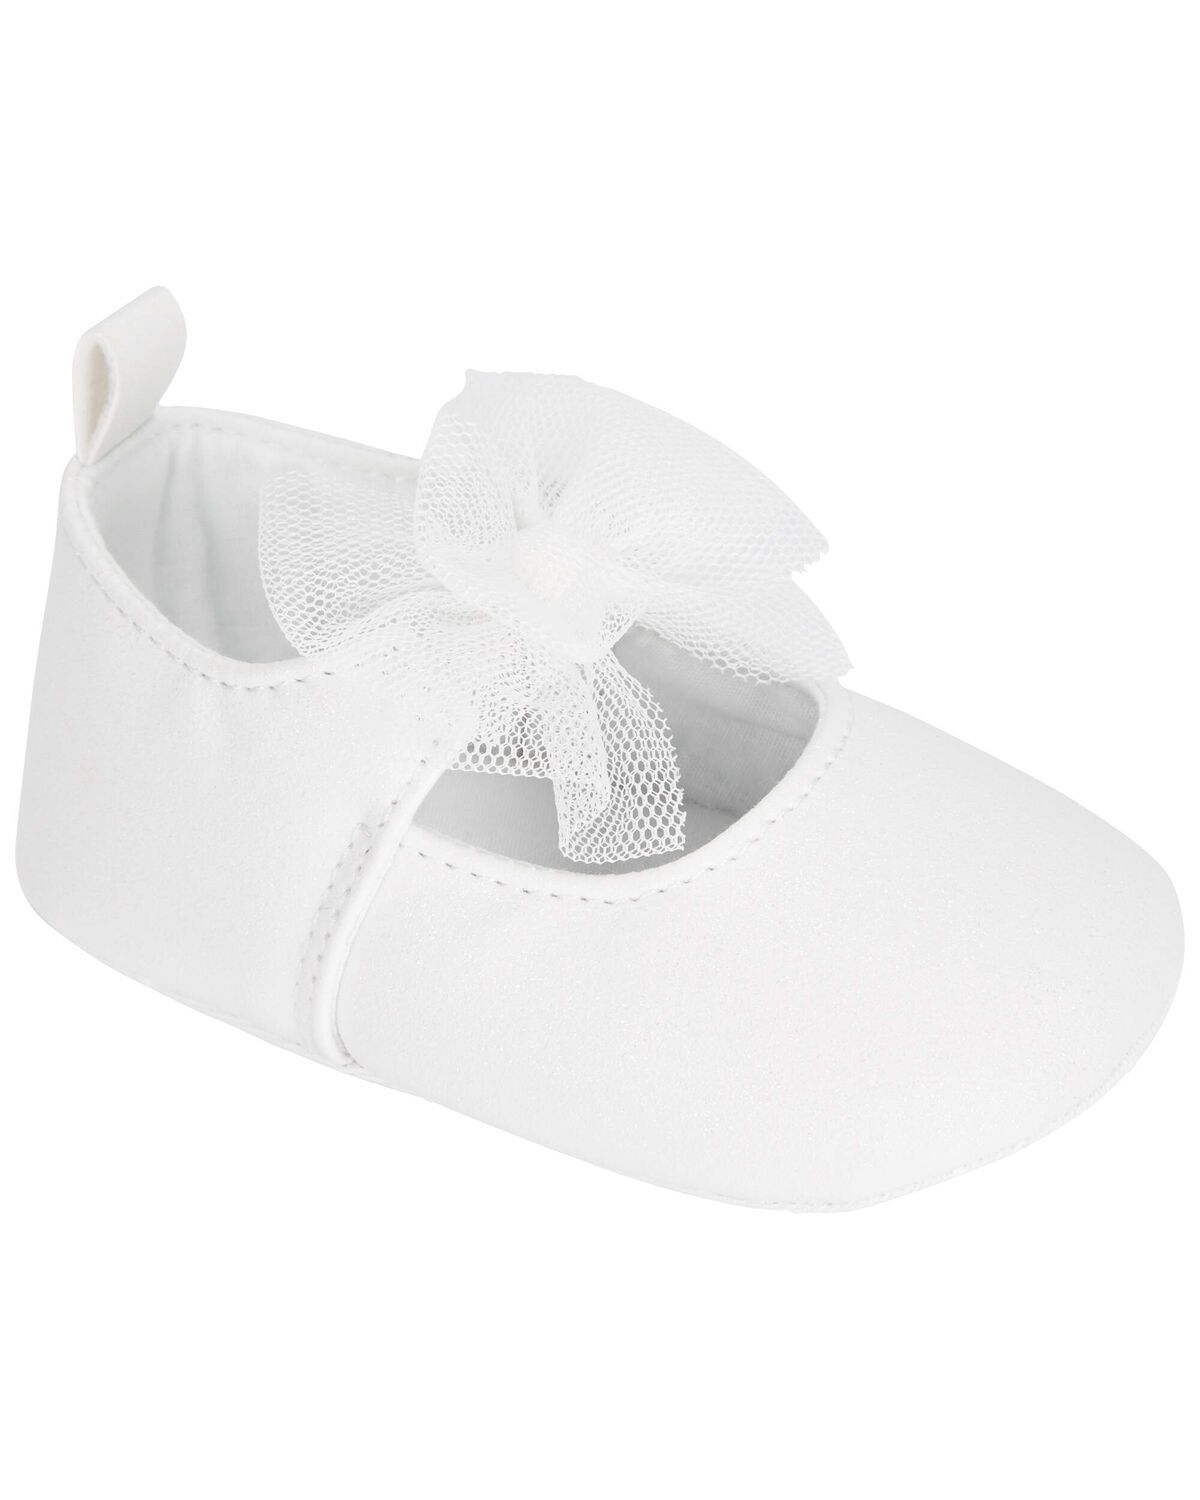 White Baby Mary Jane Dress Shoes | carters.com | Carter's